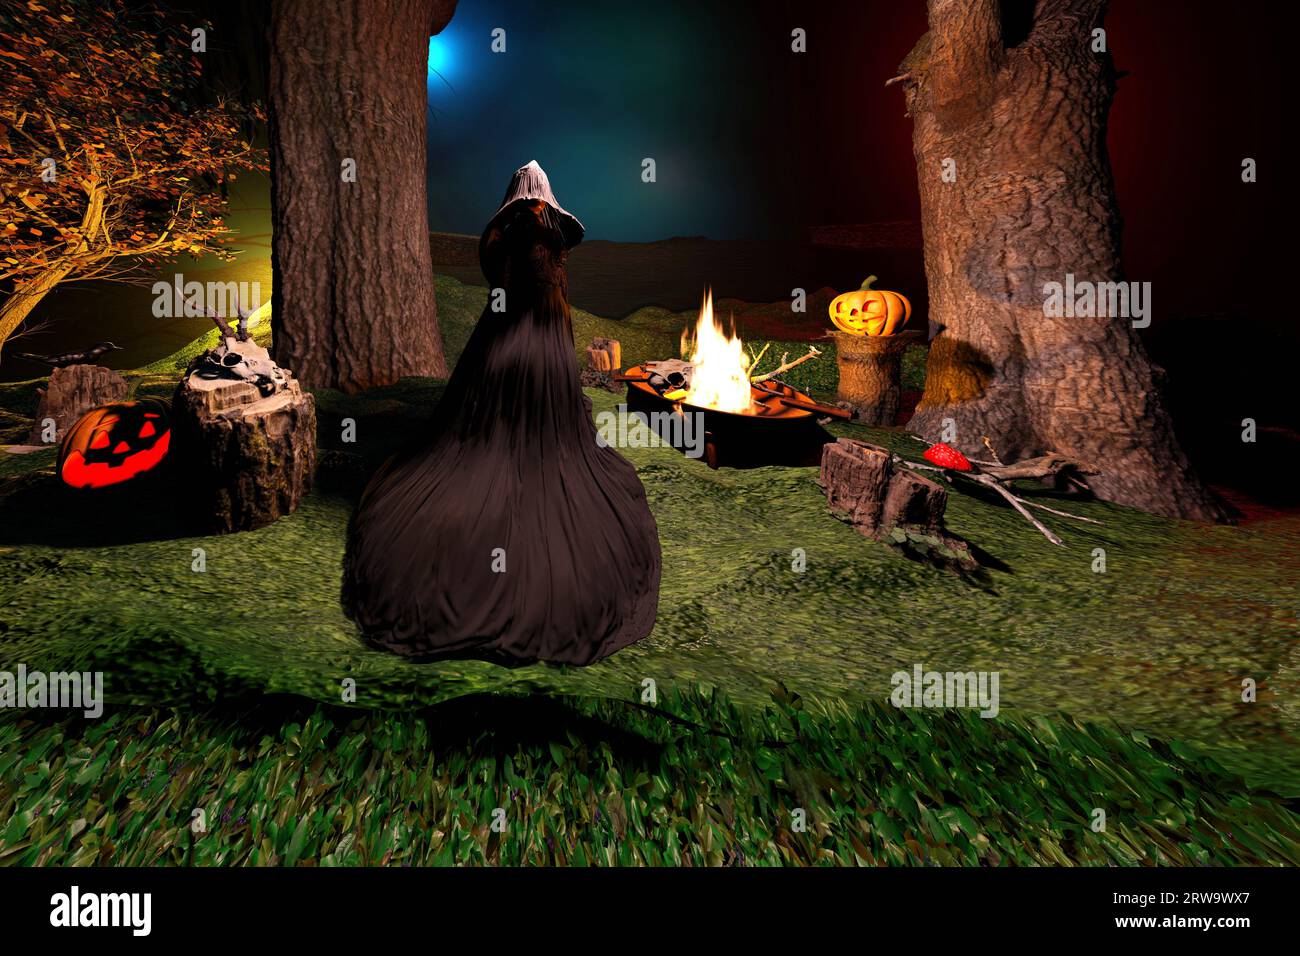 Halloween background. Witch with pumpkins making fire in spooky enchanted forest in the night. 3D render illustration. Stock Photo